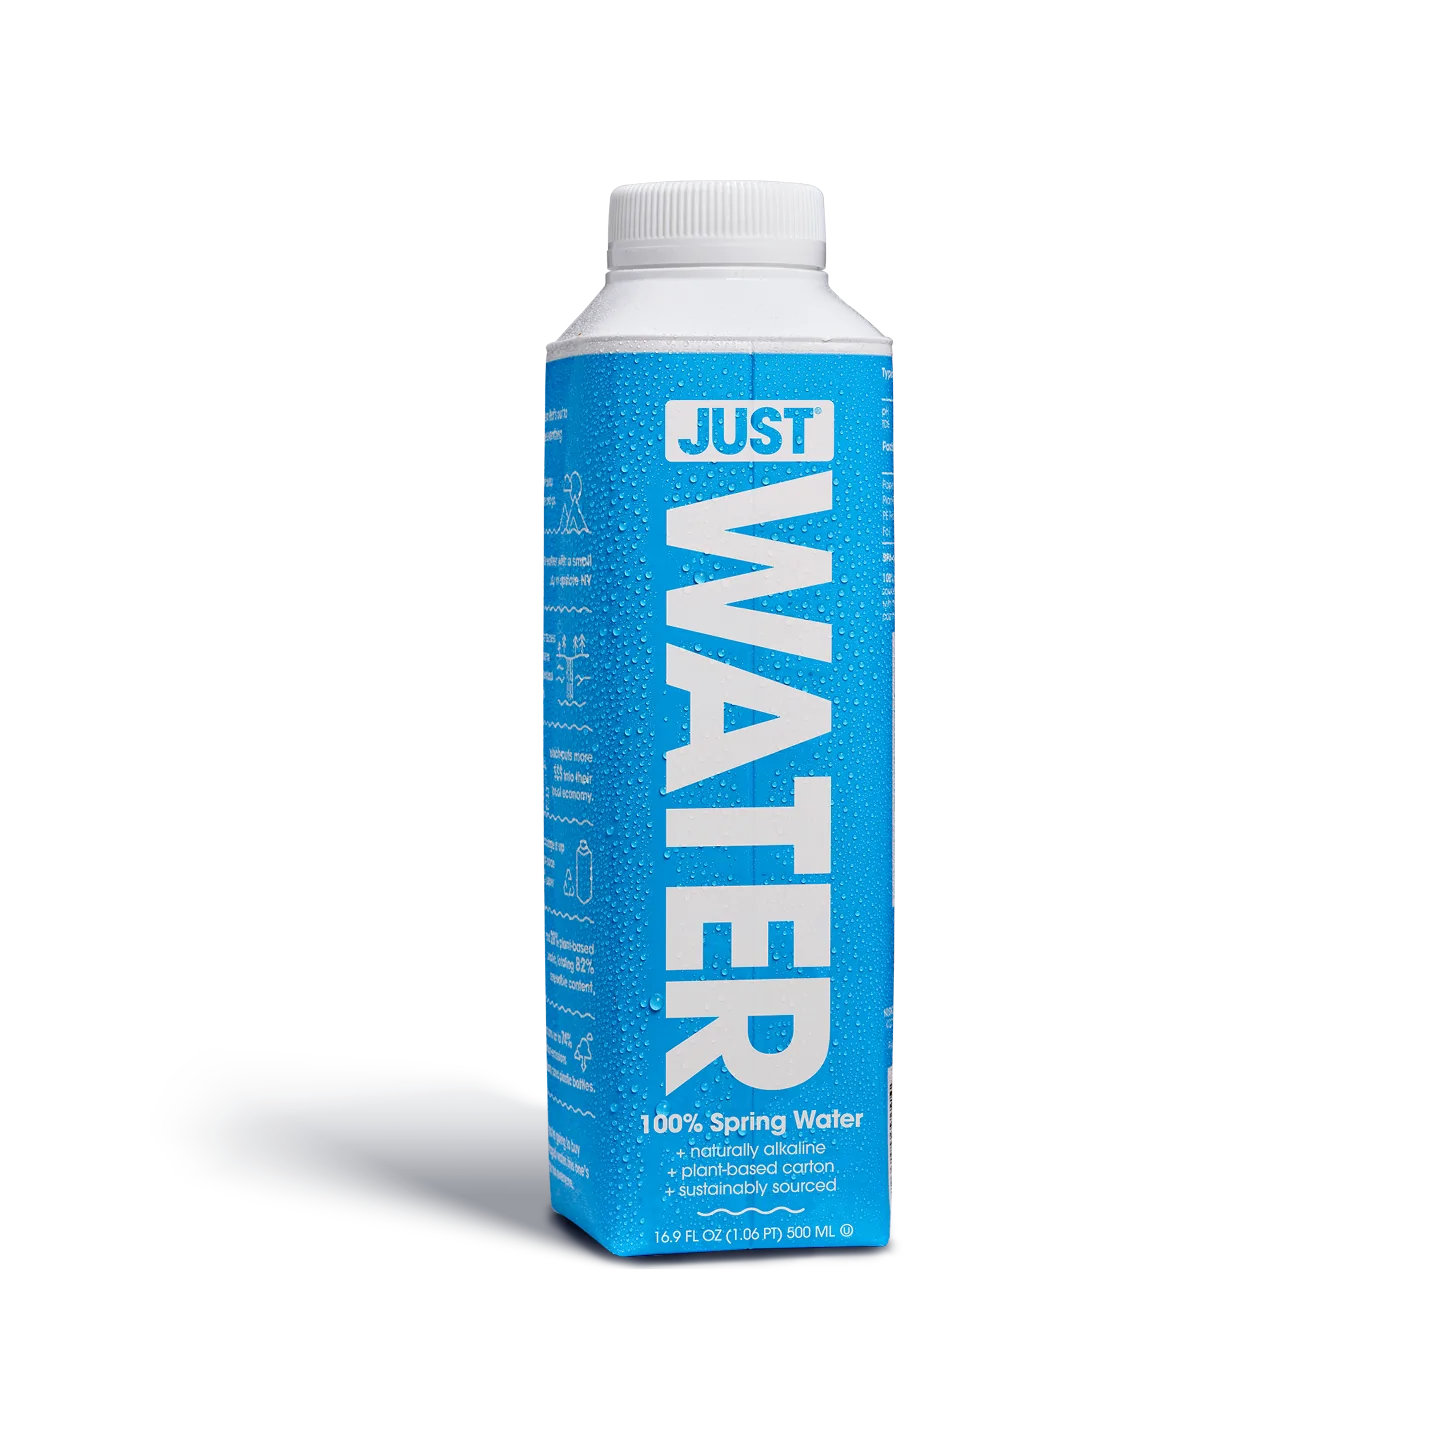 Alkaline Boxed Water for Delivery – JUST WATER